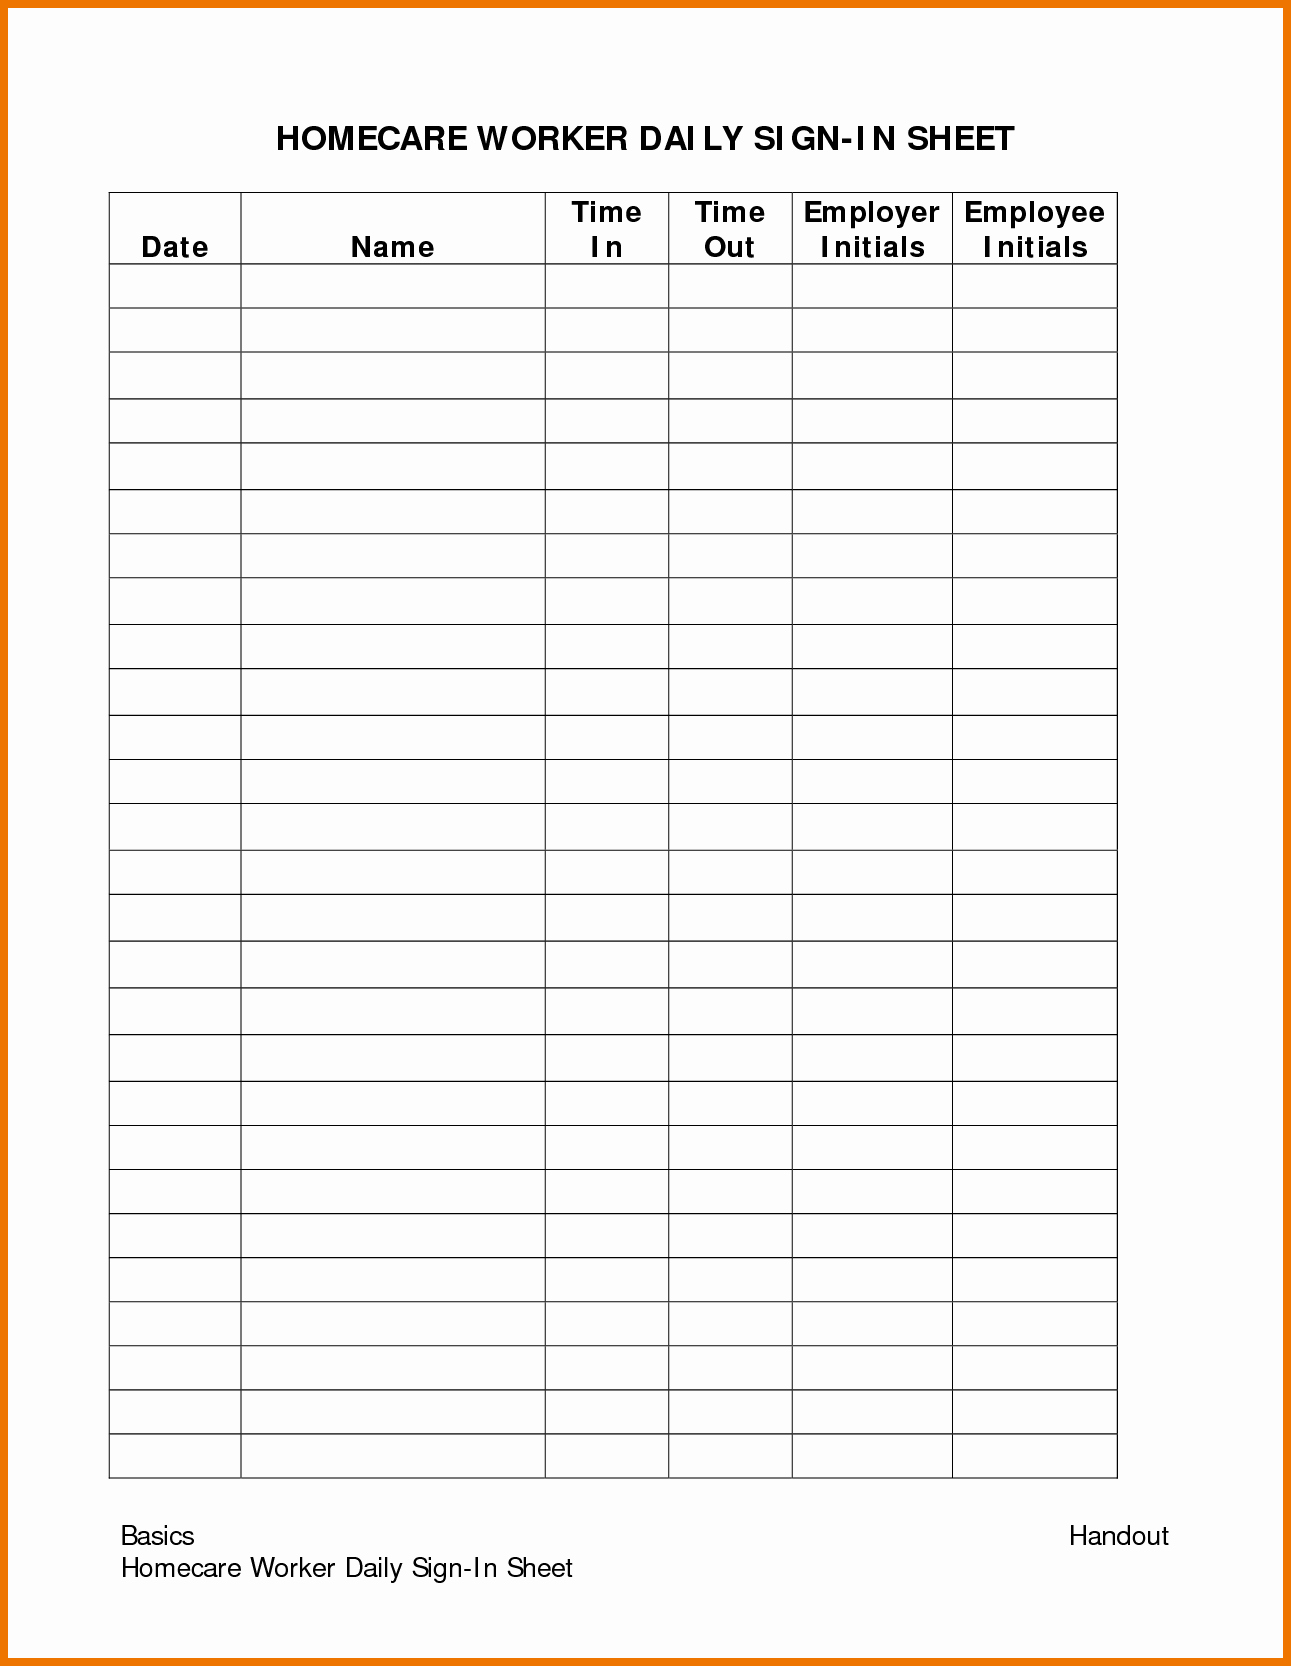 Daily attendance Sheet In Excel New Brilliant Daily attendance Sign In Sheet for Homecare